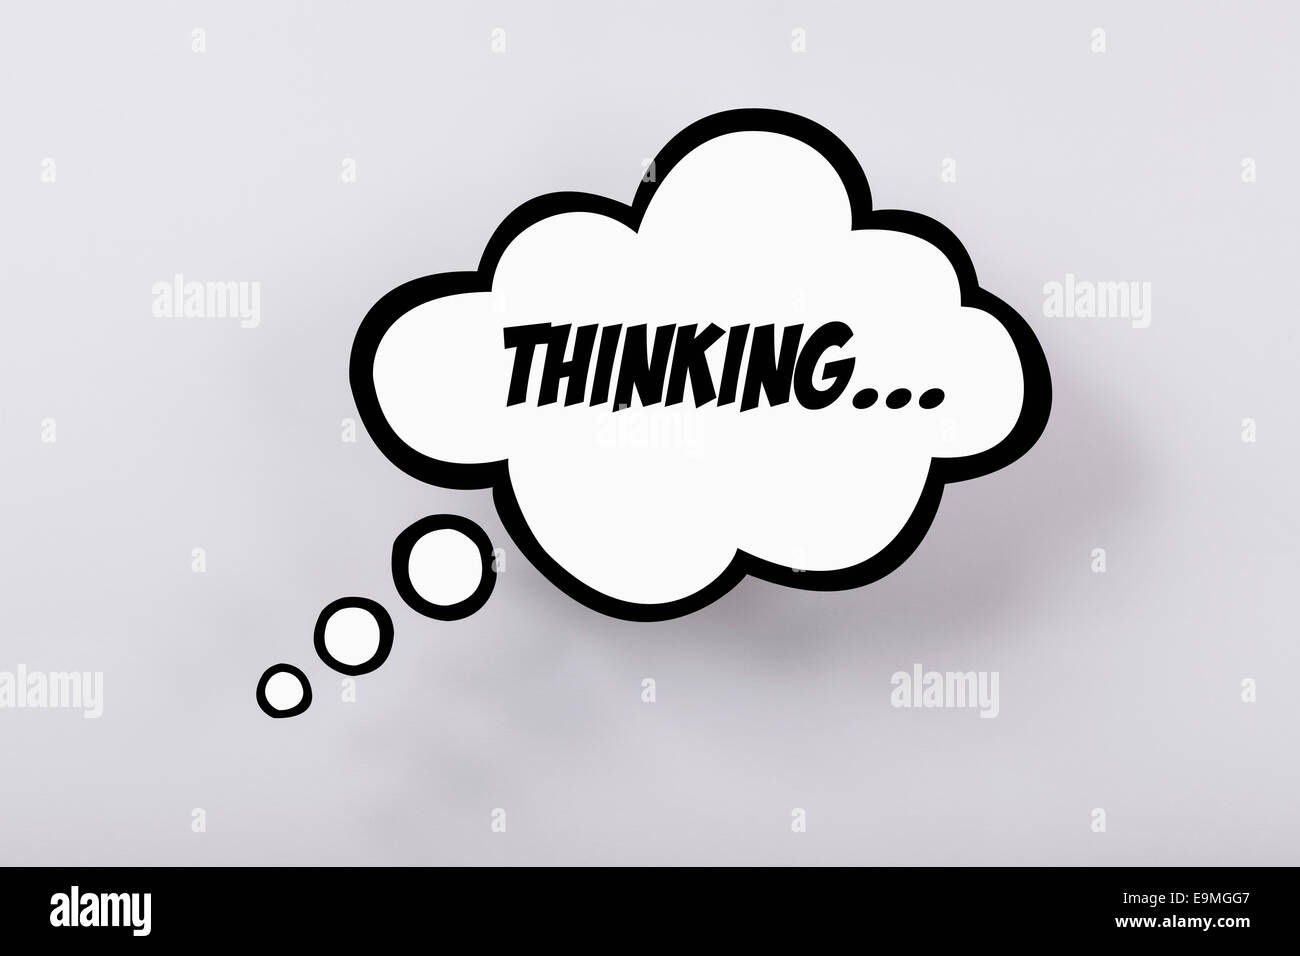 Thinking speech bubble against gray background Stock Photo